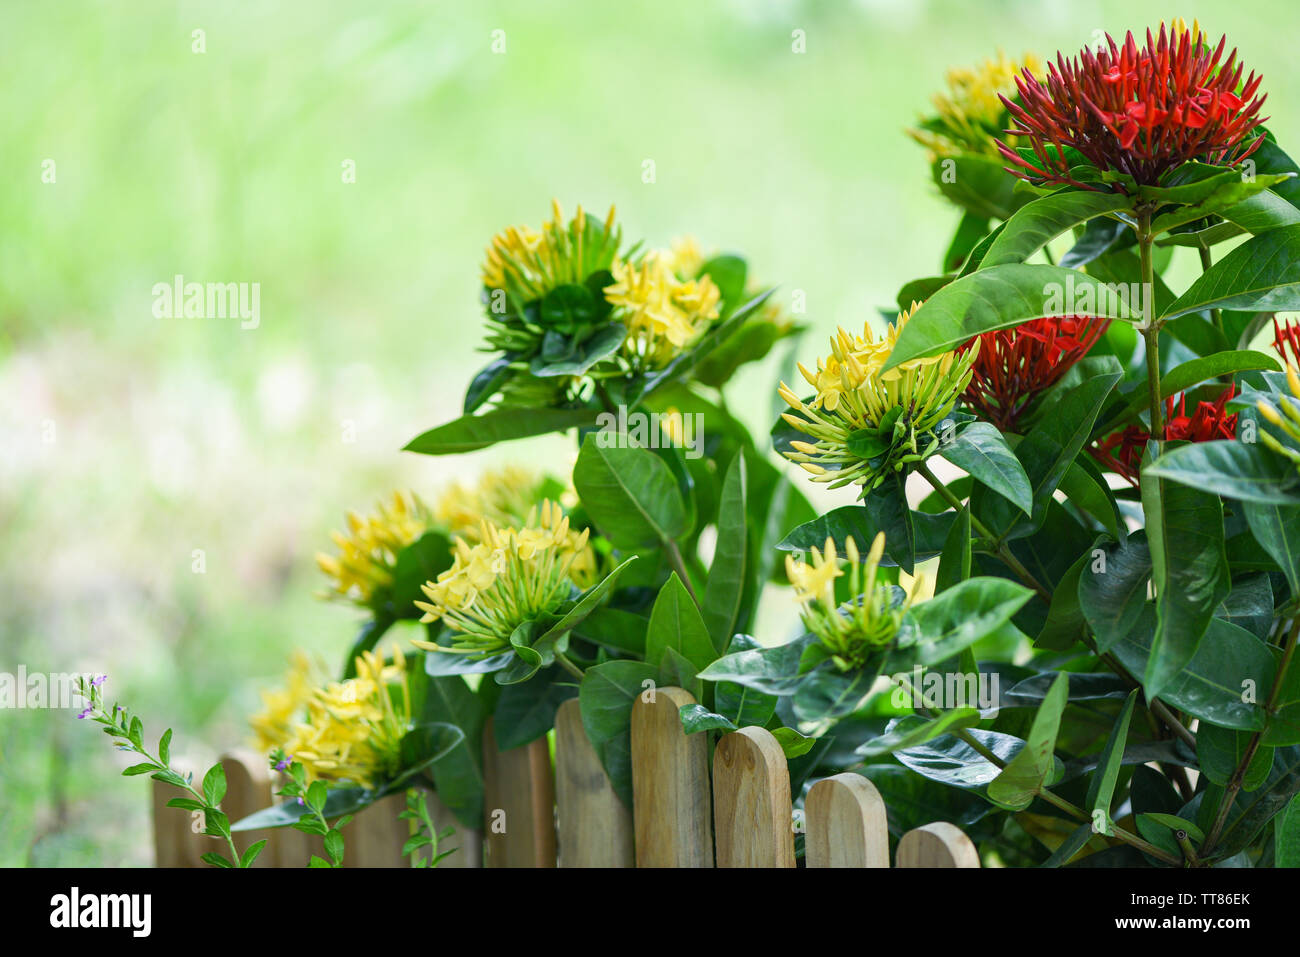 Ixora flower red and yellow blooming in the garden beautiful nature green background / Chinensis Ixora coccinea Stock Photo